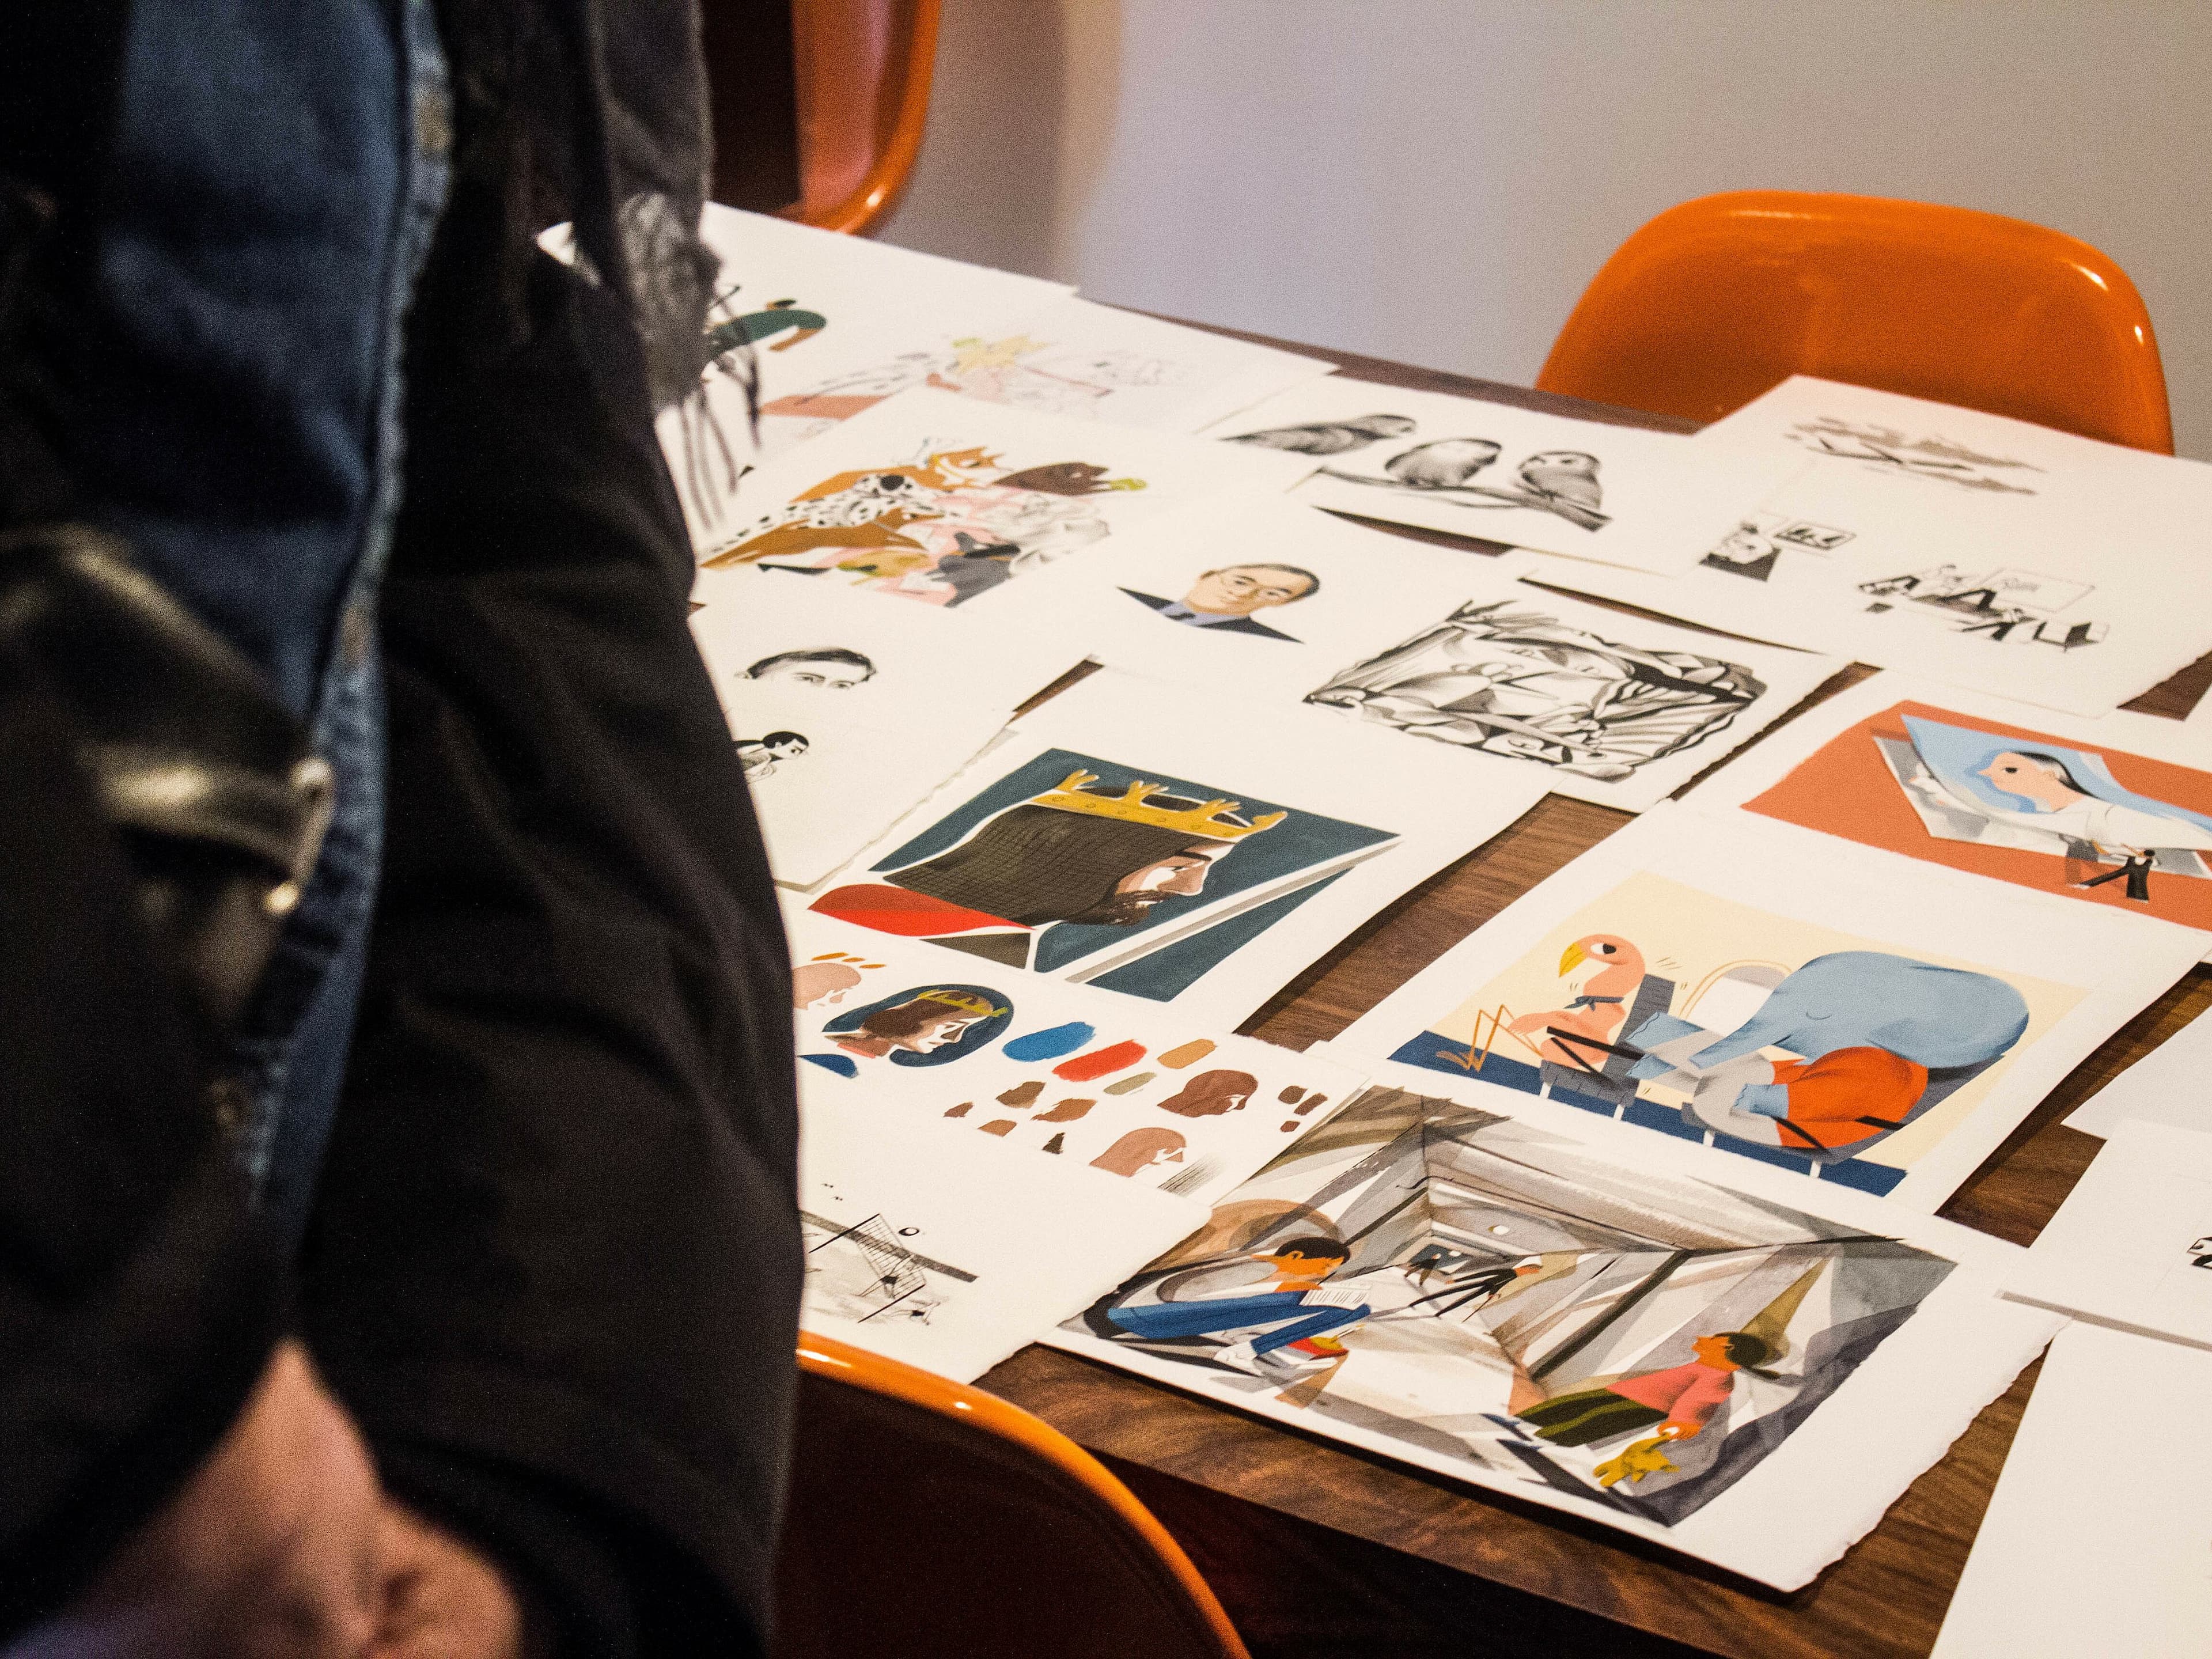 A table covered with various colorful drawings and illustrations, some depicting people and scenes, is being observed by a person in a black jacket. Bright orange chairs surround the table. The focus is on the artwork spread across the table.